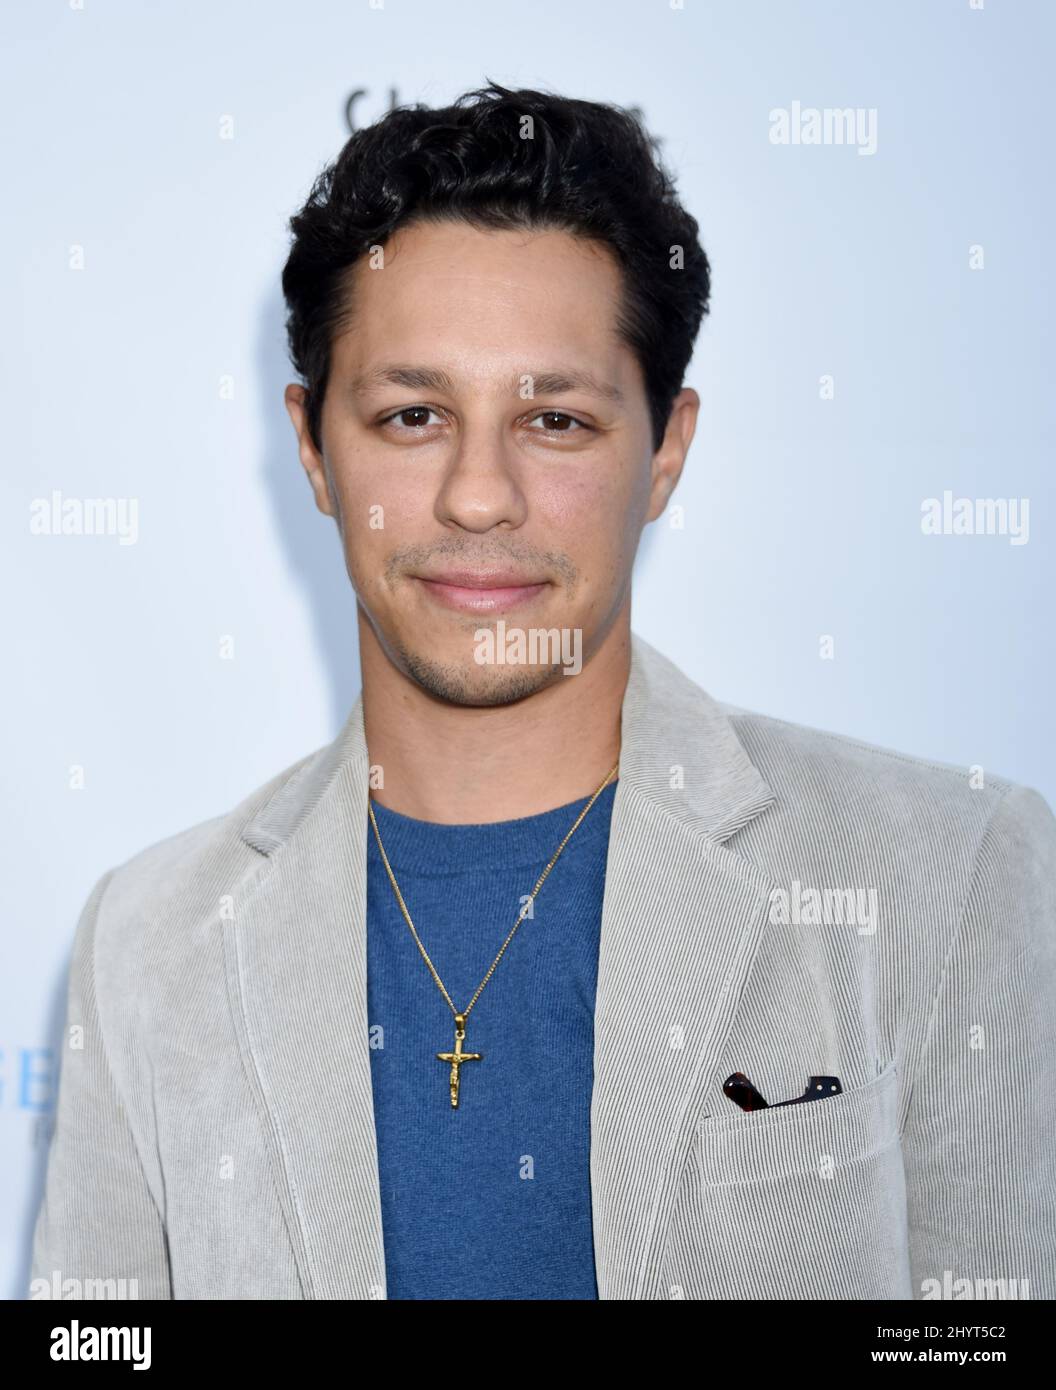 David El Rio at the George Lopez Foundation14th Annual Celebrity Golf Classic Pre-Party held at Baltaire Restaurant on October 3, 2021 in Brentwood, CA. Stock Photo